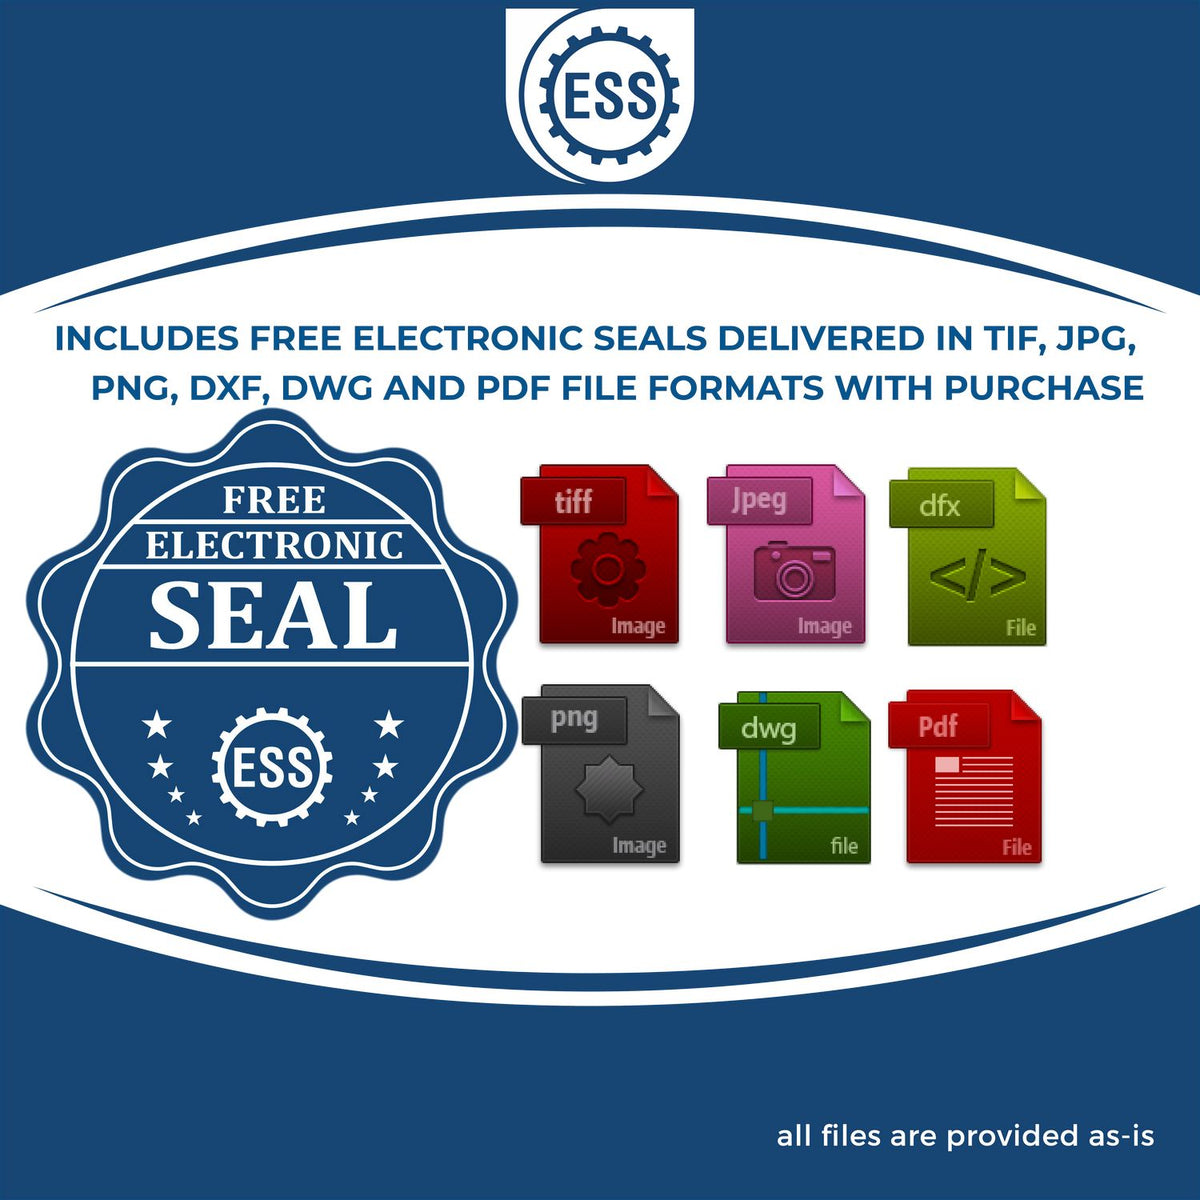 An infographic for the free electronic seal for the Slim Pre-Inked Louisiana Land Surveyor Seal Stamp illustrating the different file type icons such as DXF, DWG, TIF, JPG and PNG.